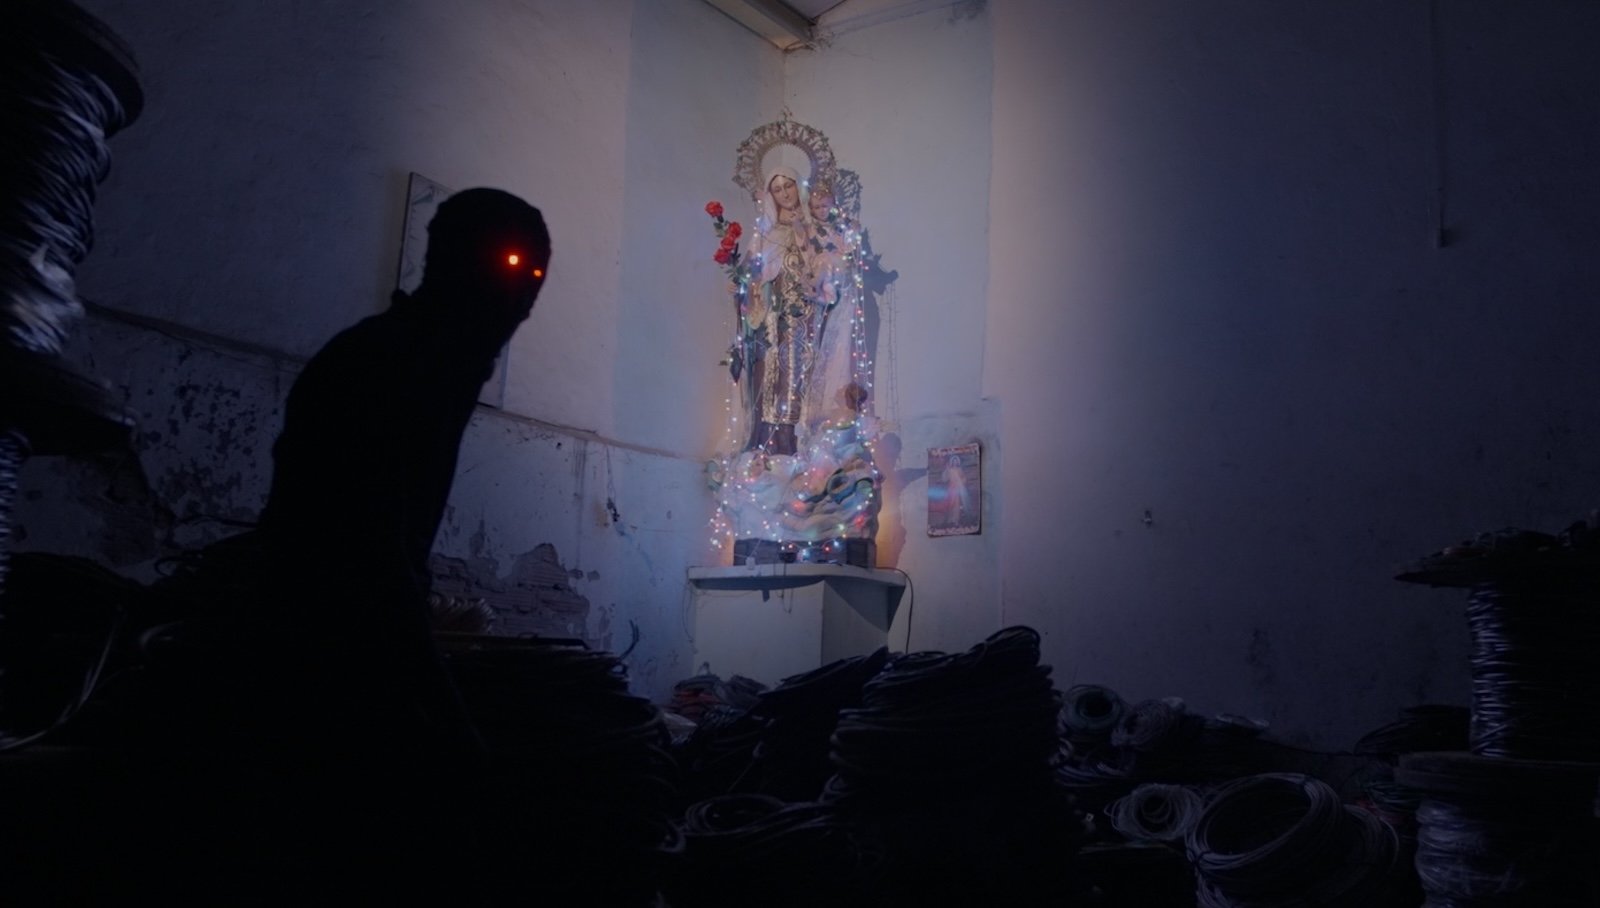 A dark figure with glowing red eyes stalks a room at night, where a Virgin Mary statue sits in the corner holding a rose.